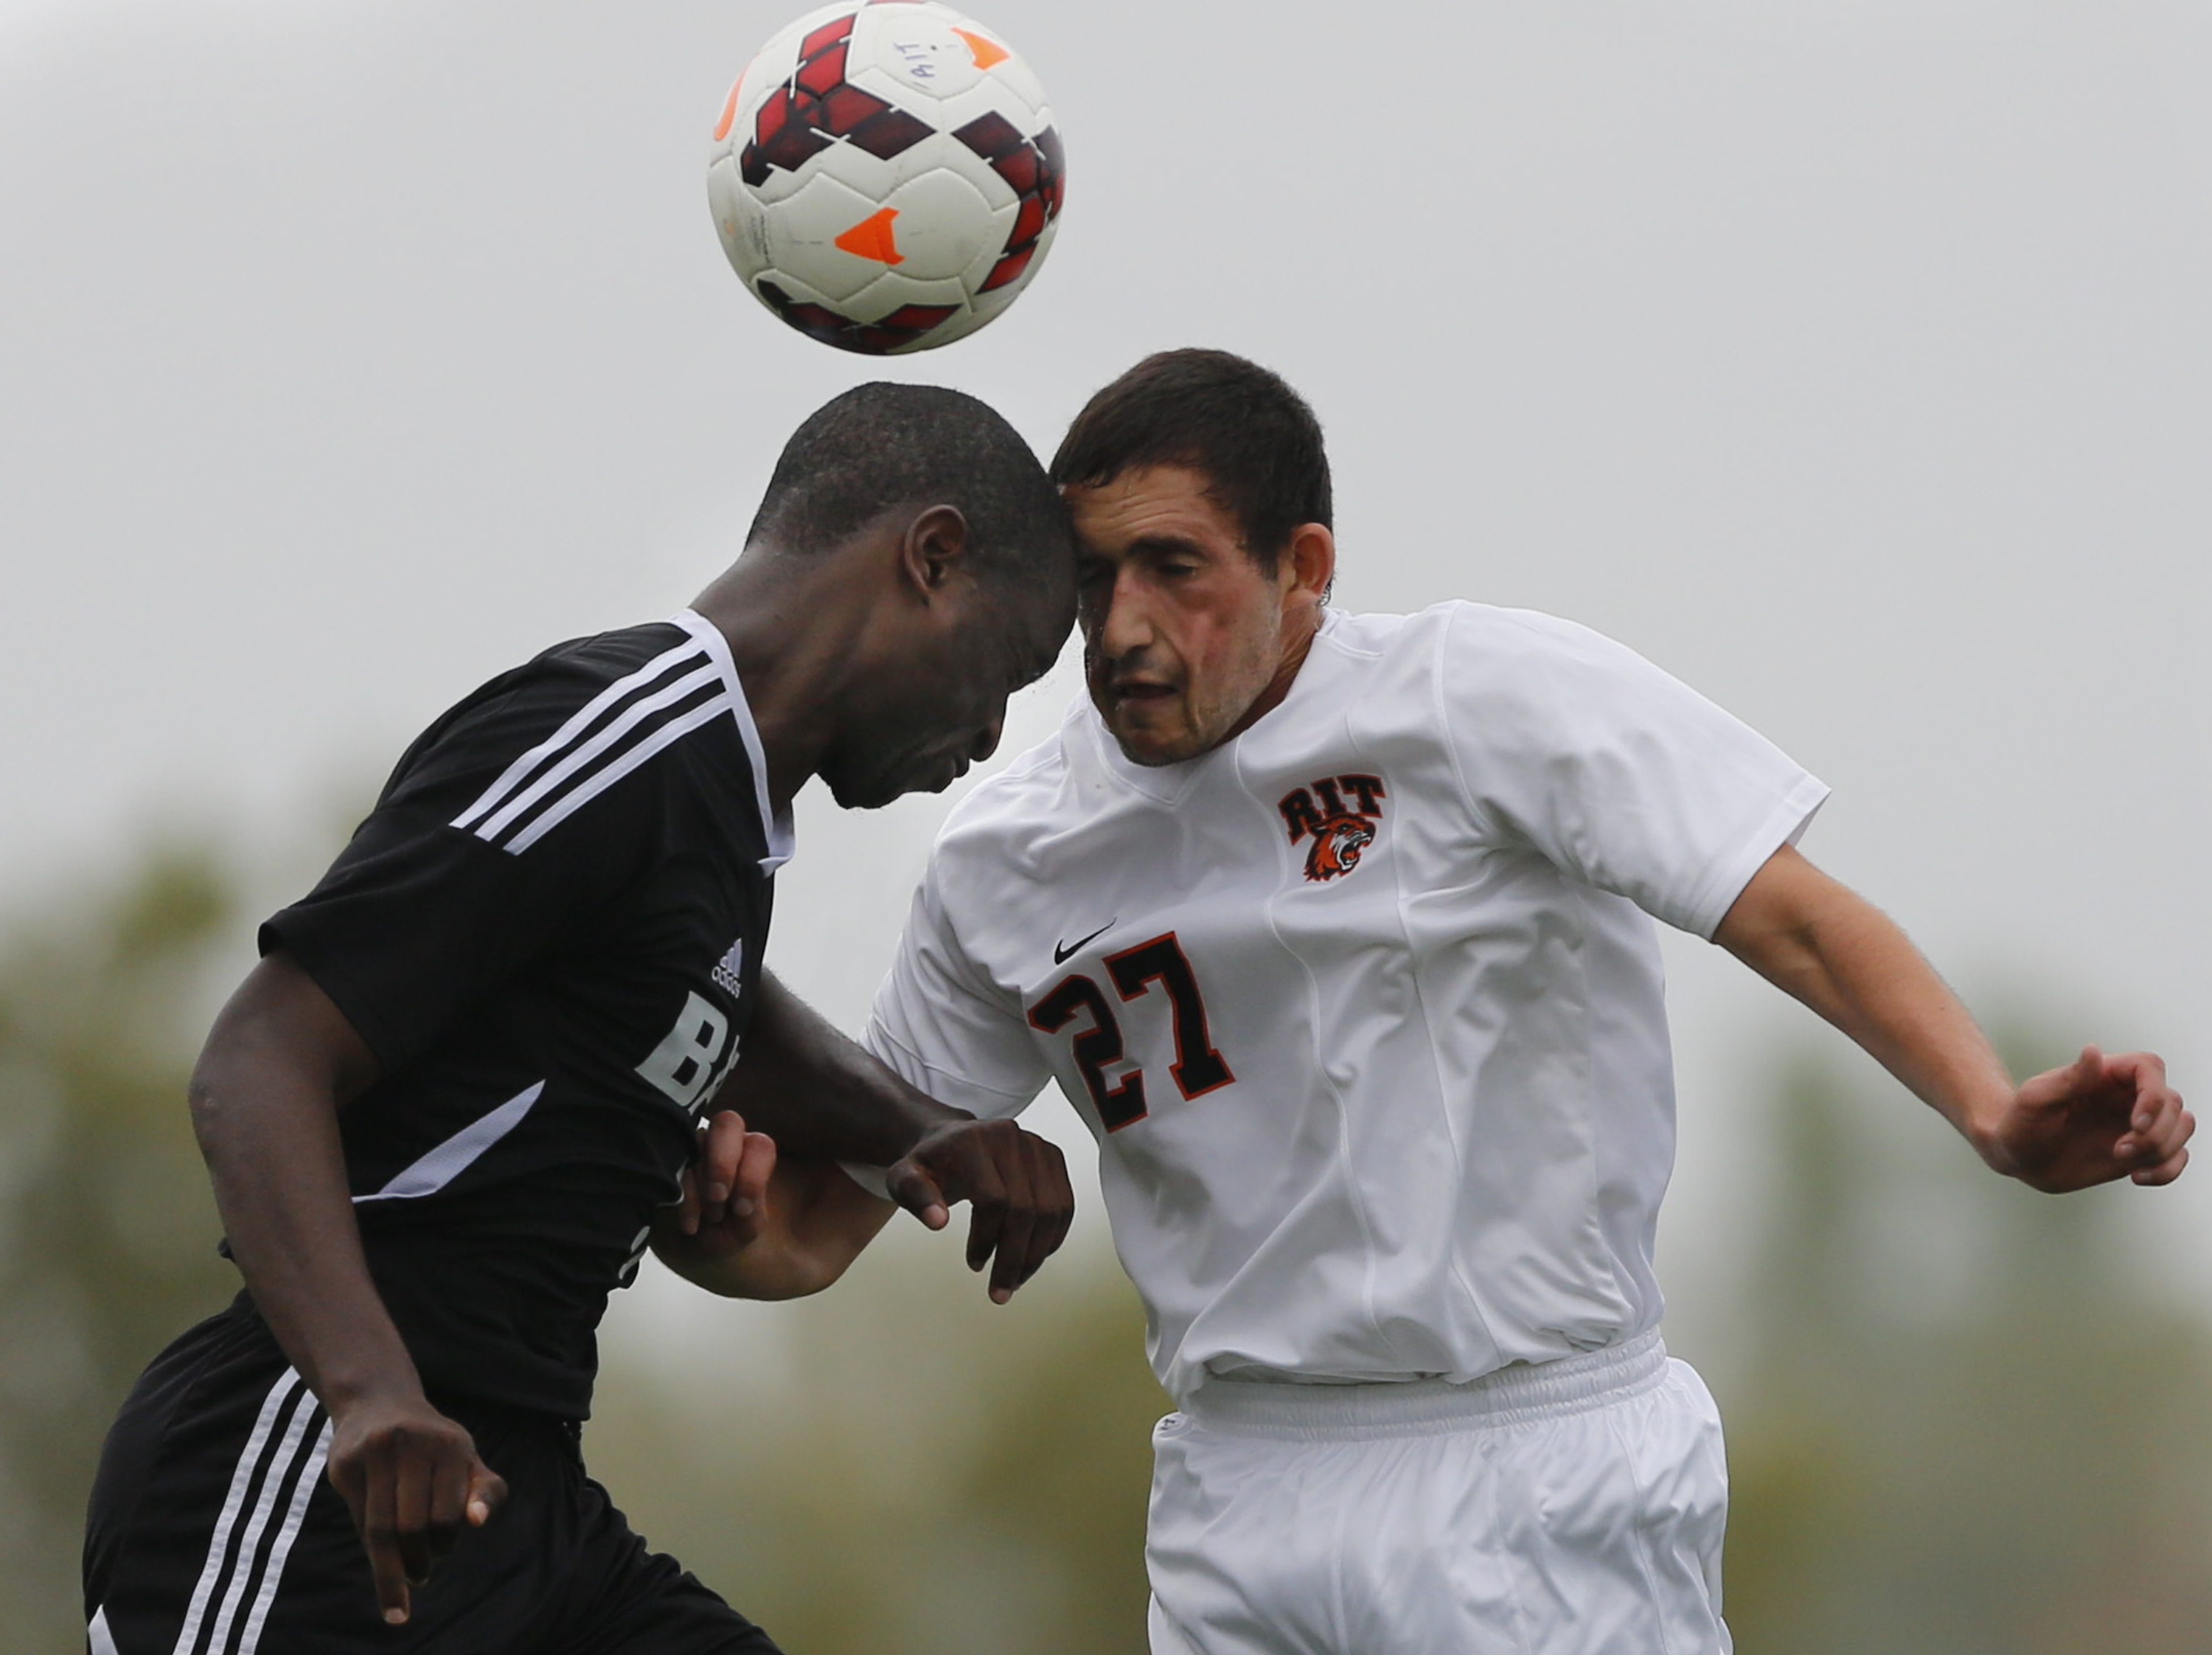 Kurt Spiegel a junior at Rochester Institute of Technology bangs heads with Gabriel Kilongo a junior at Bard College during a MenÍs soccer game between RIT and Bard College in Henrietta, New York on October 4, 2013, which ended with a final score of 4-0 RIT. Photo by Flannery Allison 